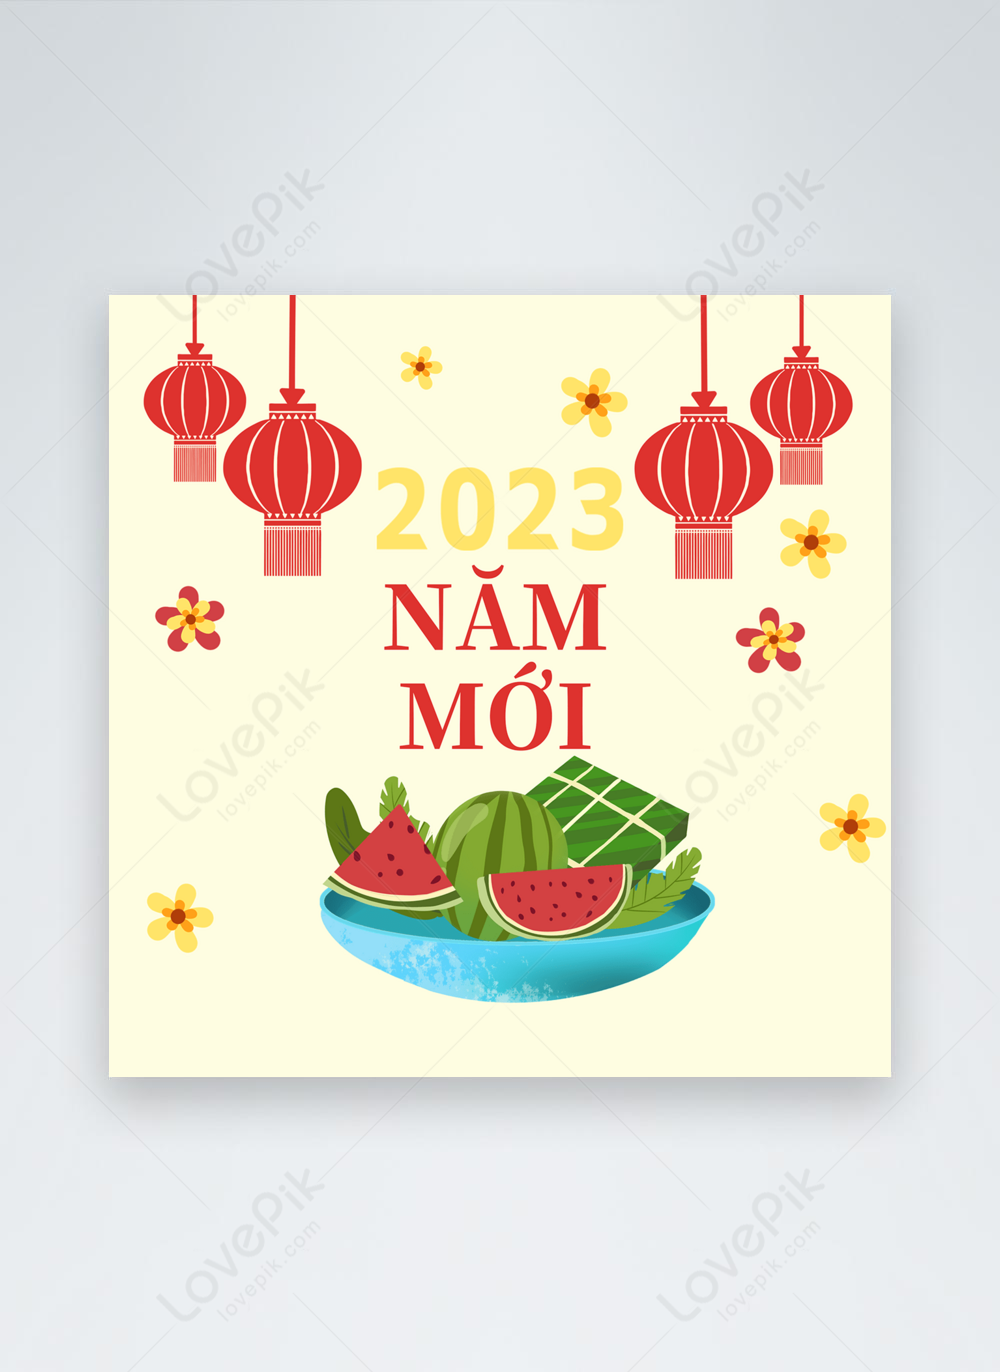 Vietnamese new year wishes traditional social media post design